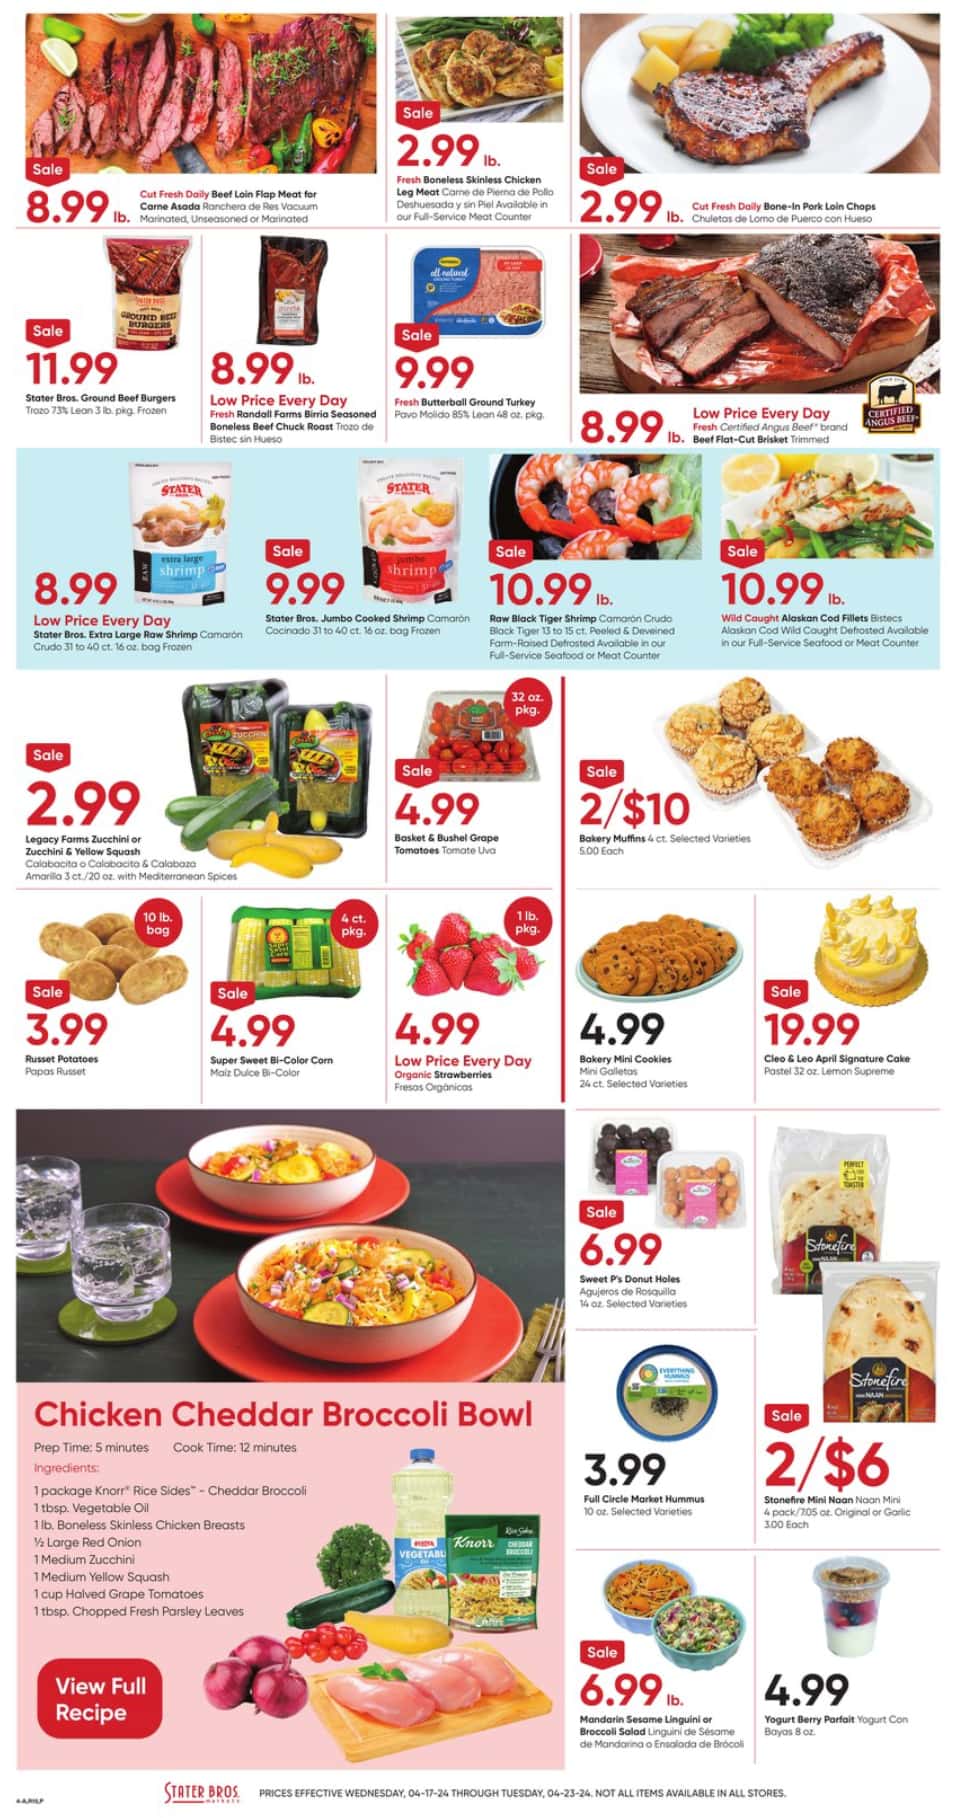 StaterBros_weekly_ad_041724_04